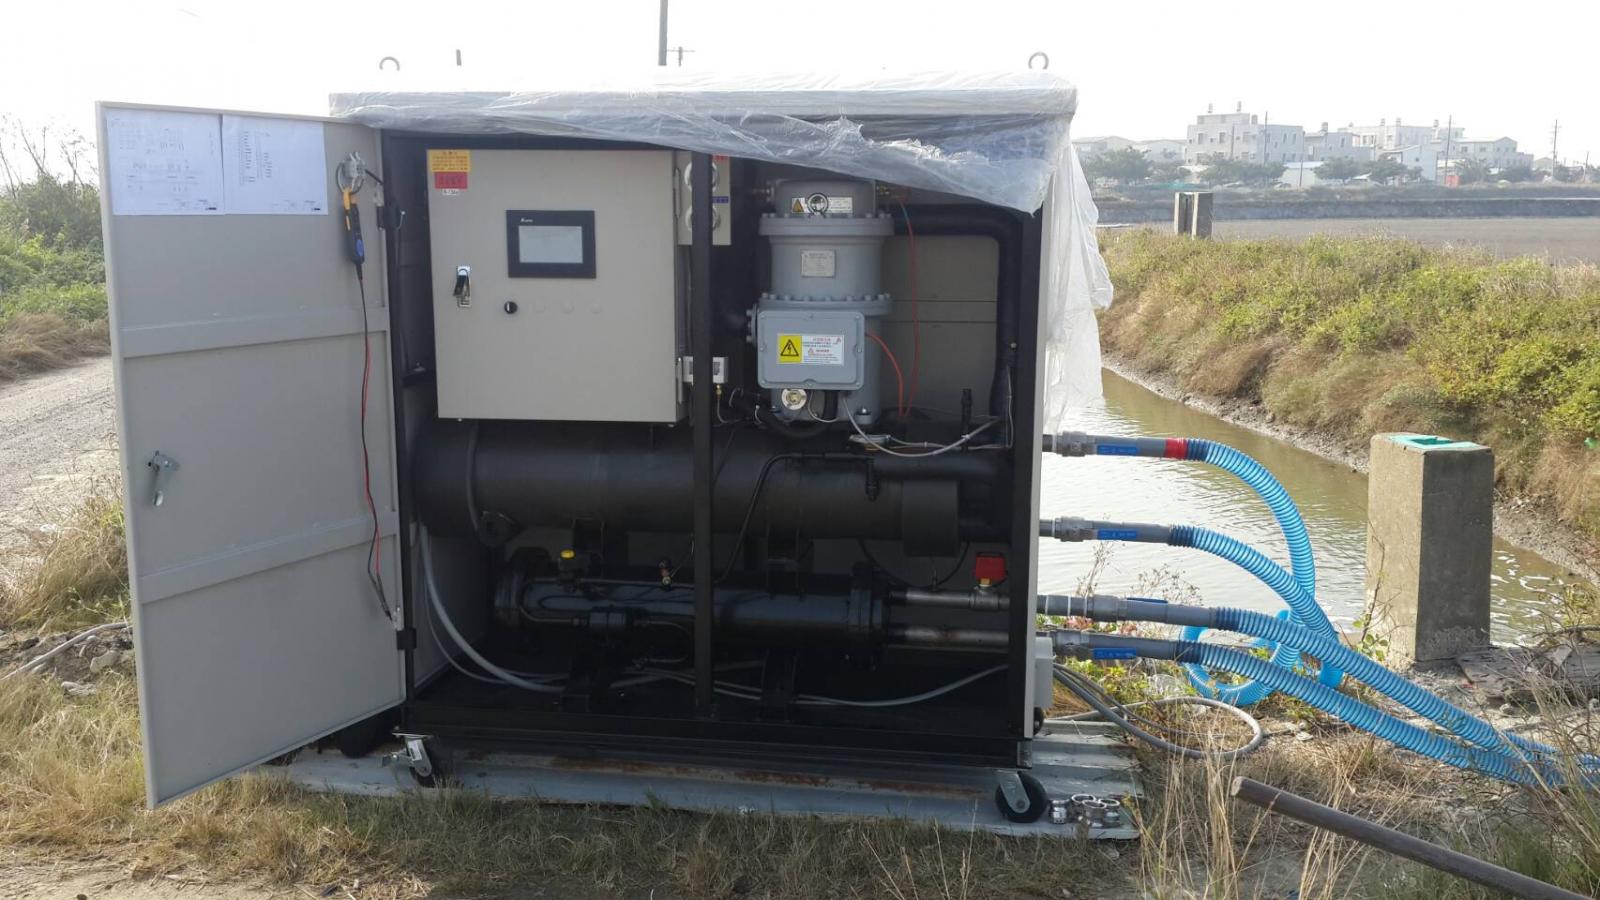 The heat pump used in the field experiment aims to assist fish farm against cold weather.